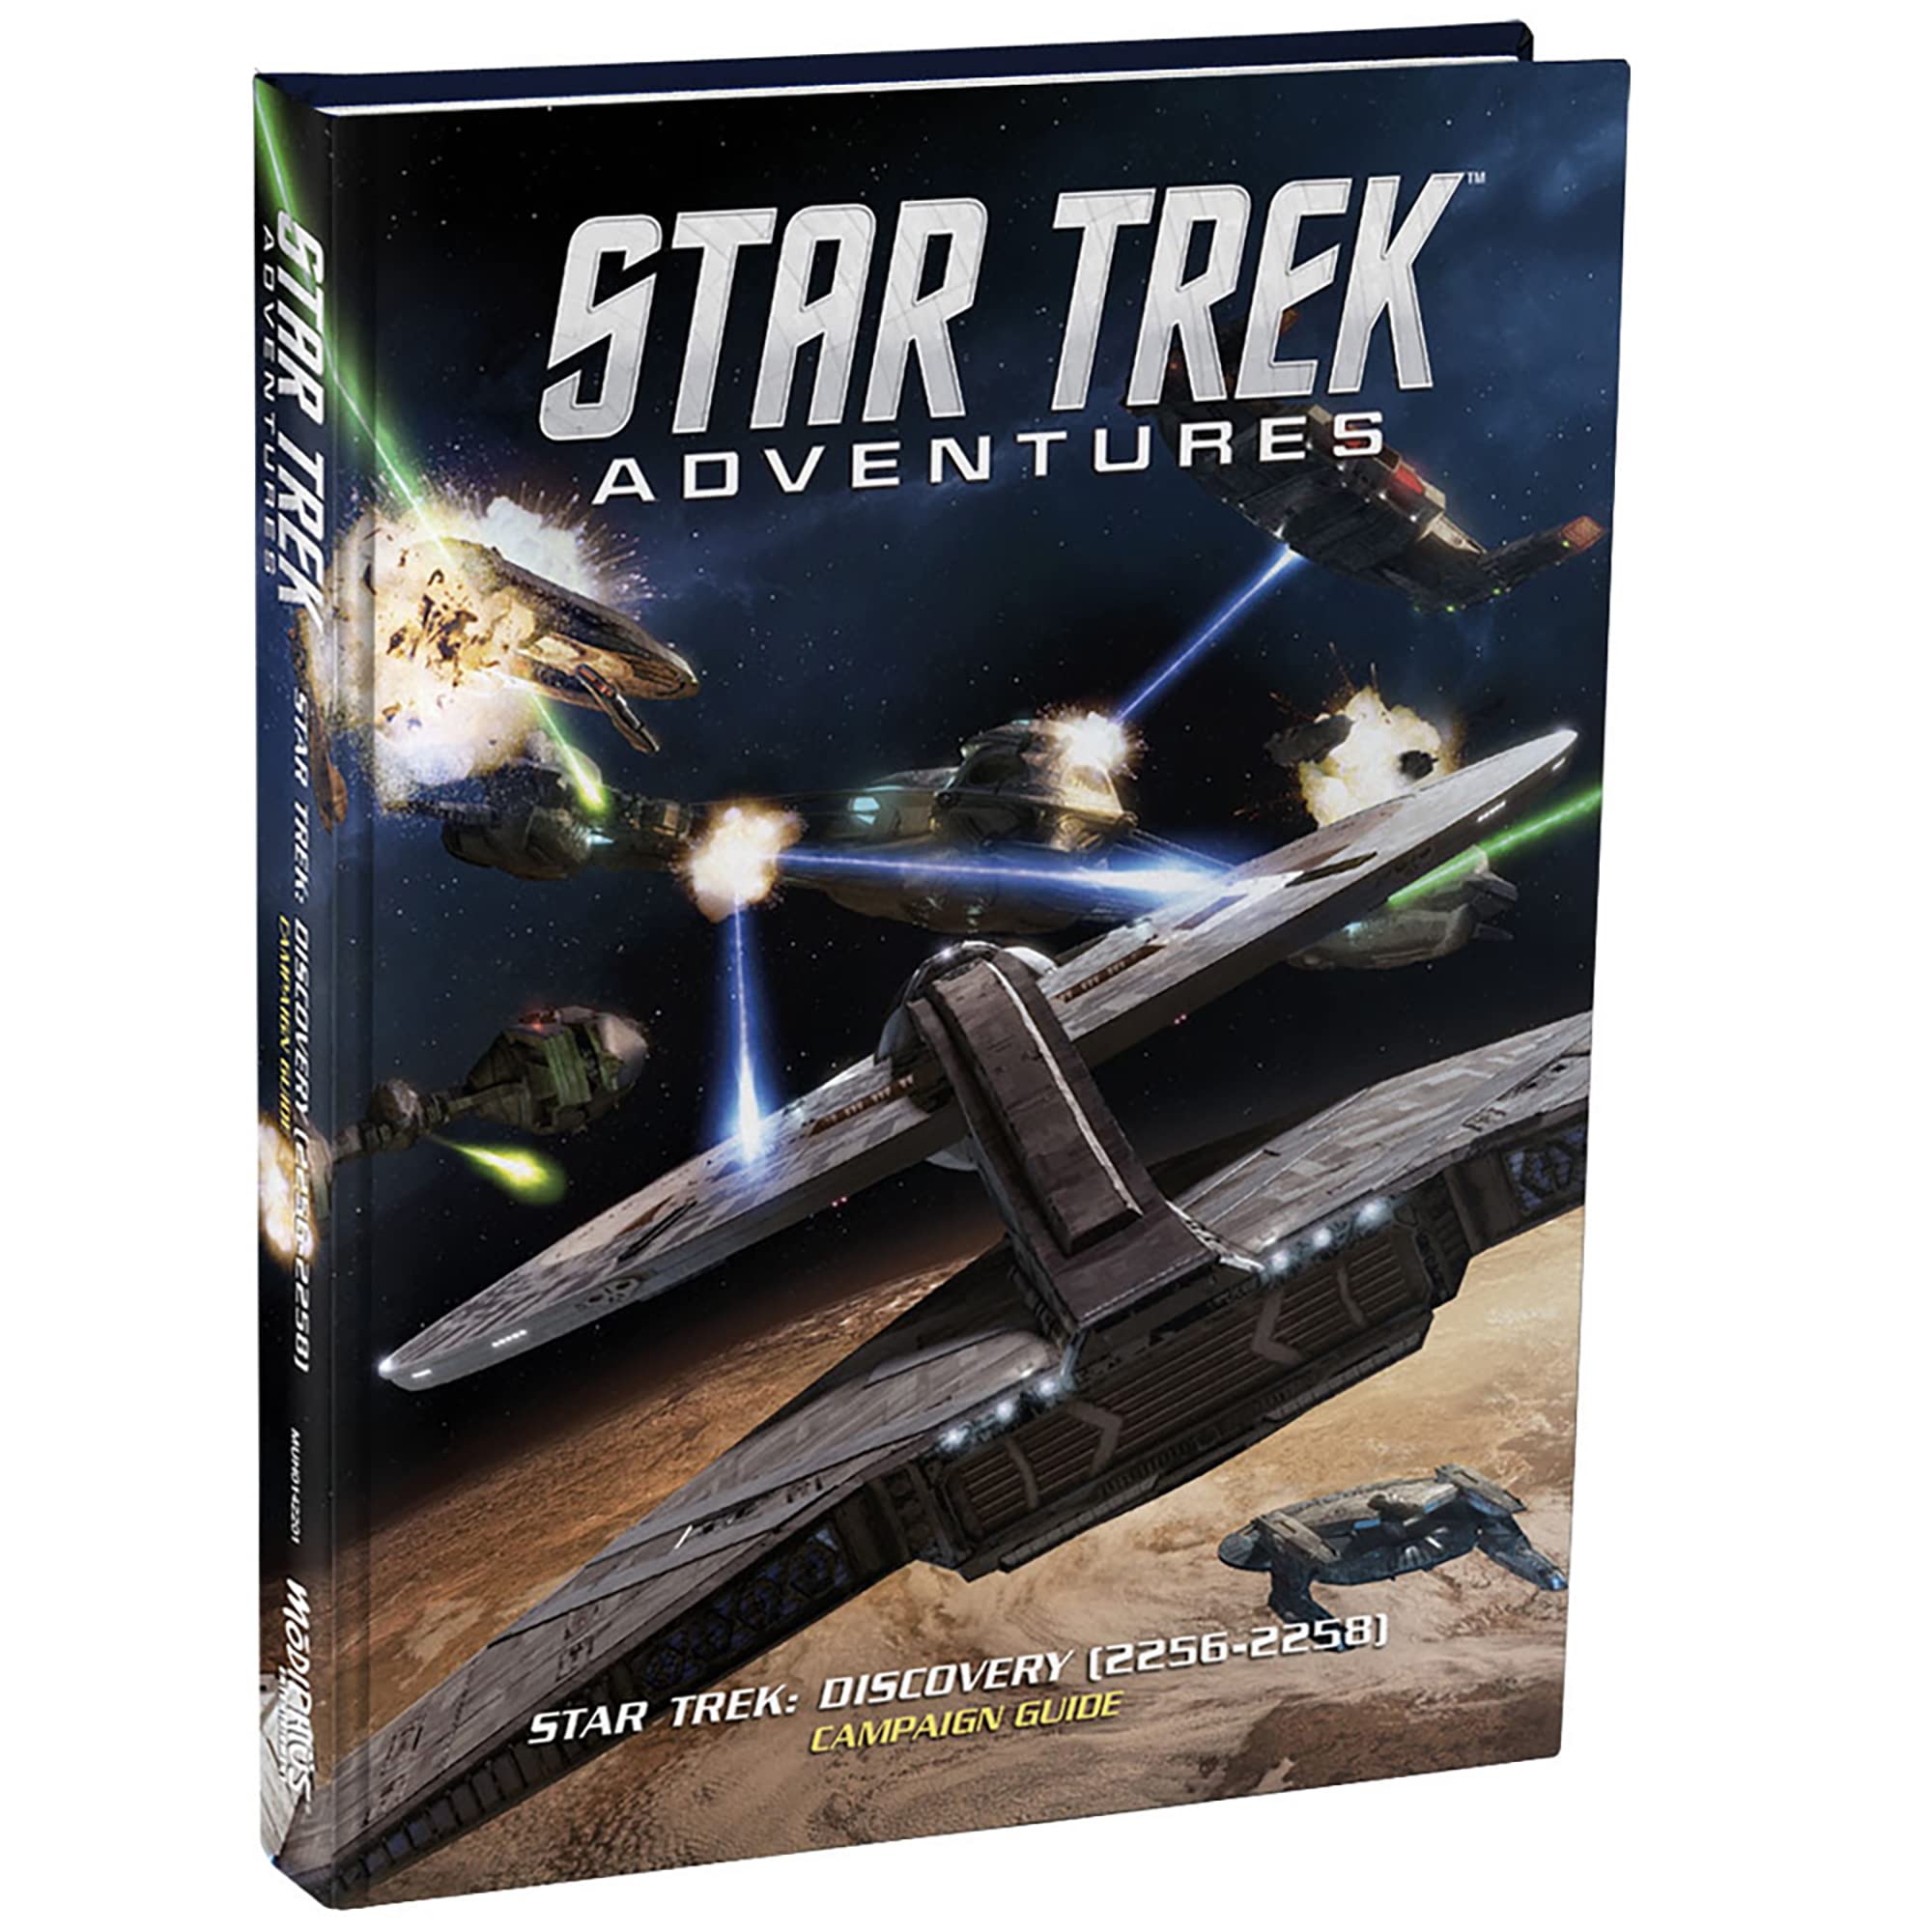 Impressions Star Trek Adventures: Discovery Campaign Guide (2256-2258), RPG Hardcover Book